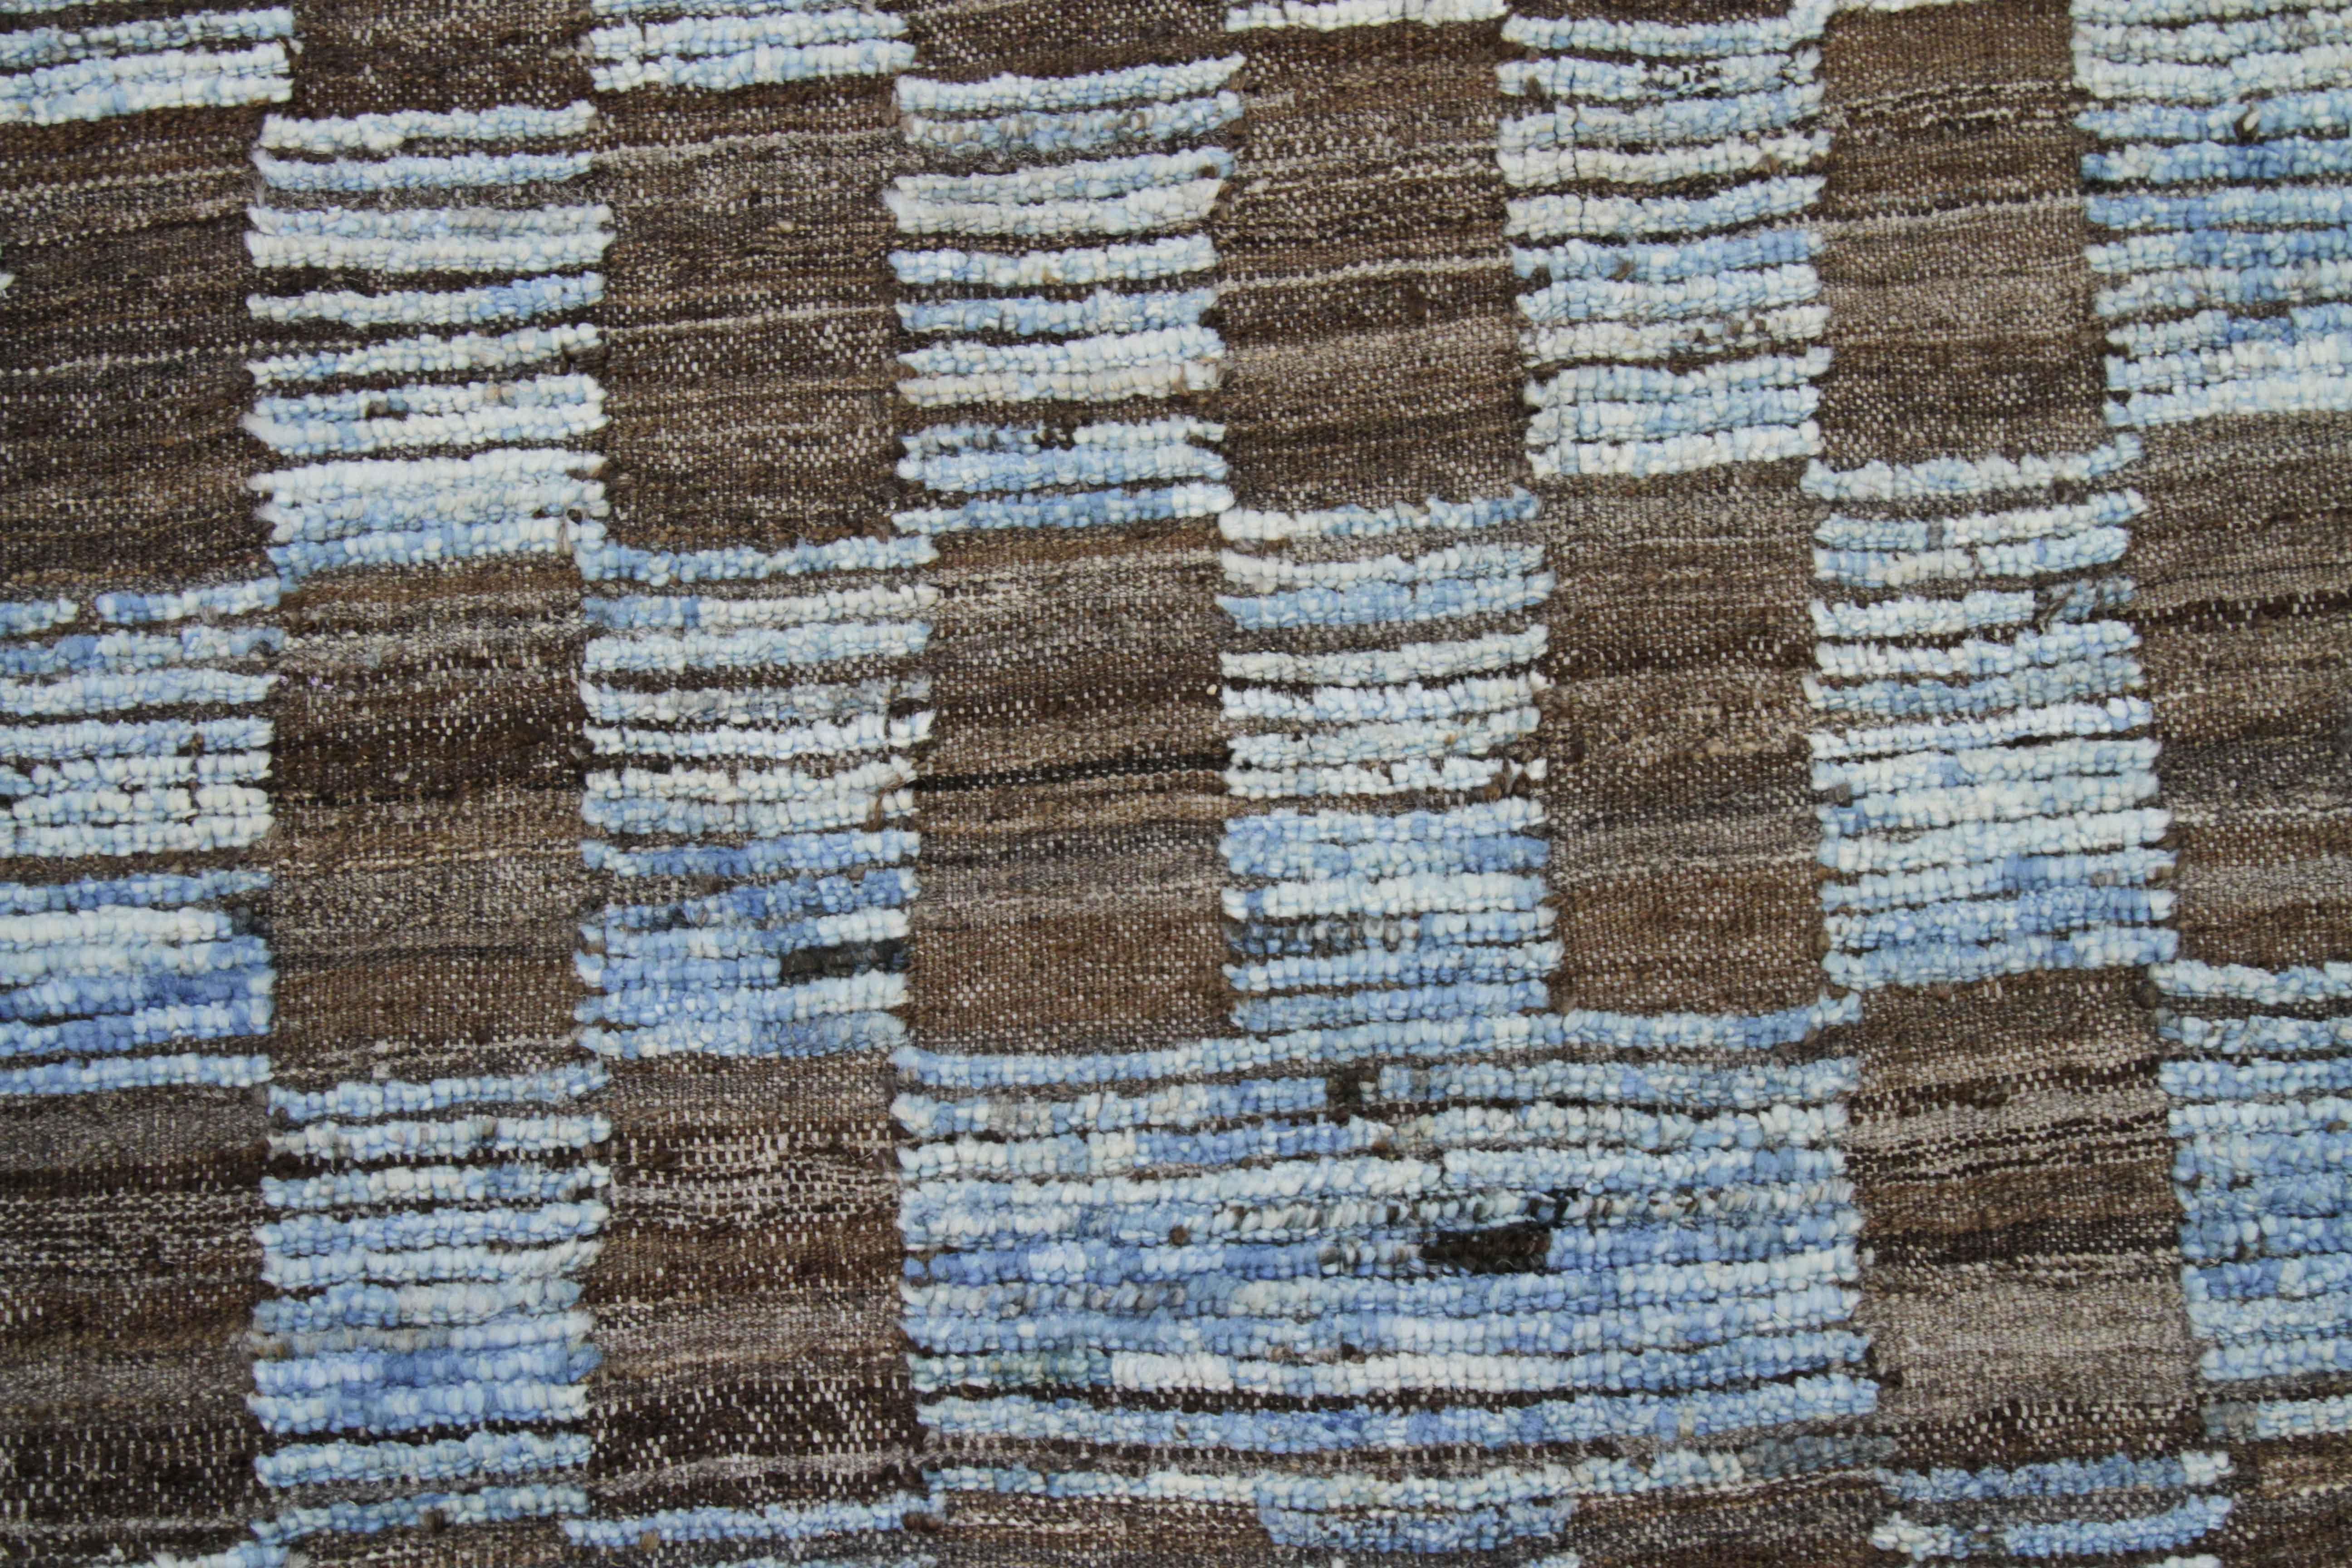 Tribal Modern Afghan Moroccan Style Rug with Brown Tile Details on Blue Field For Sale